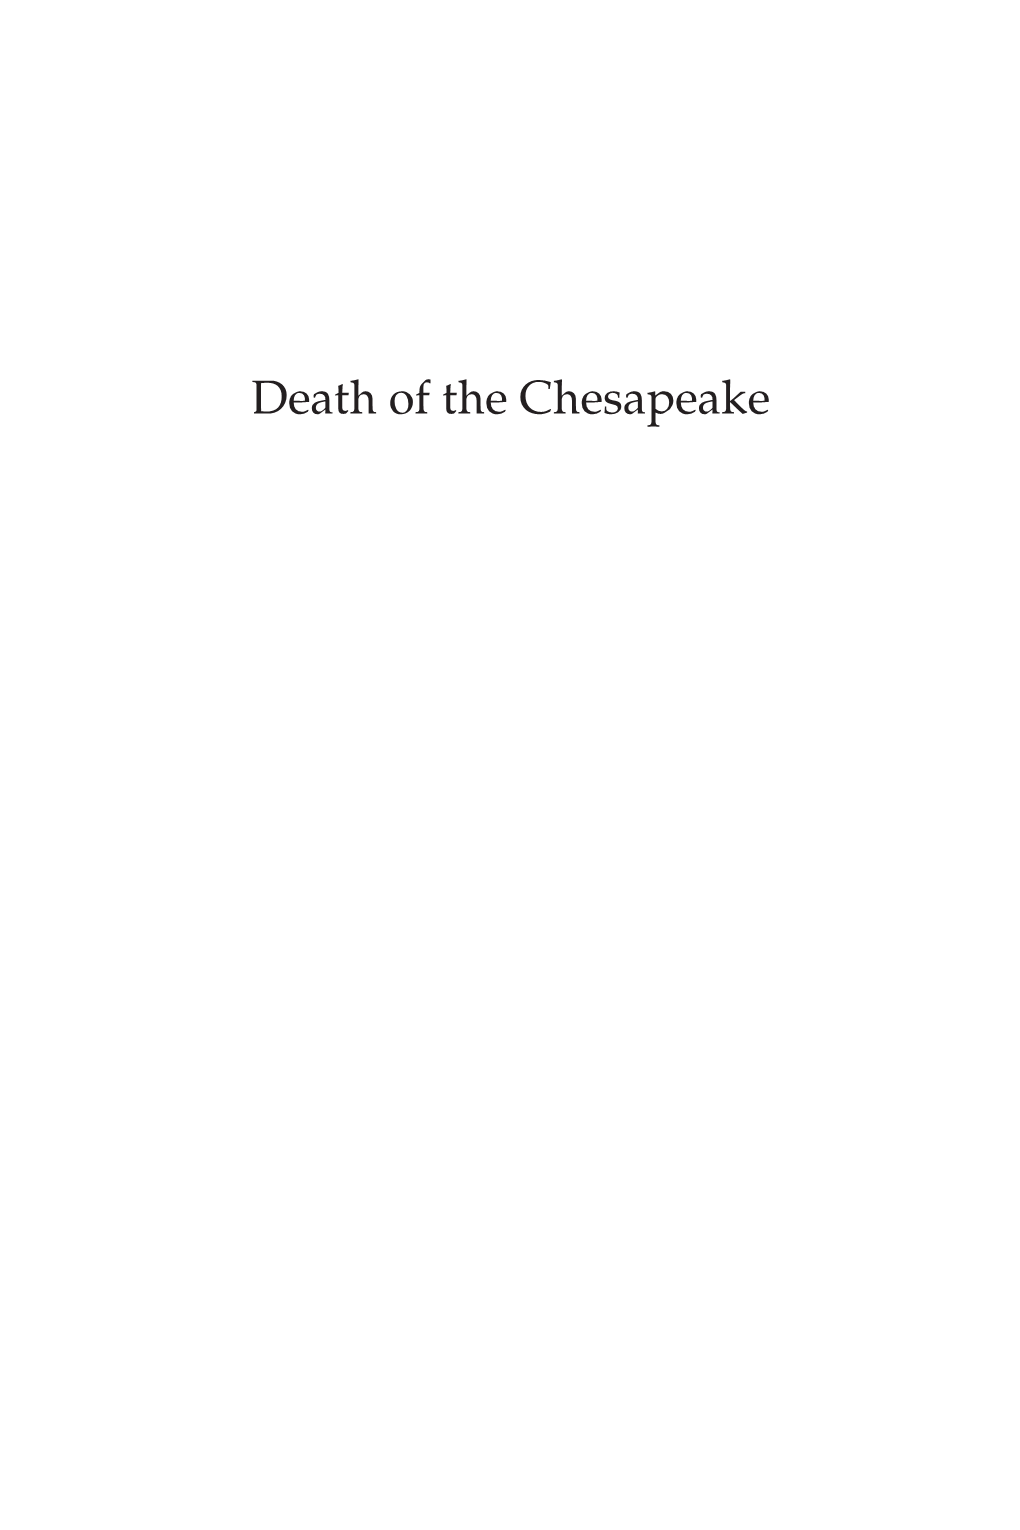 Death of the Chesapeake Scrivener Publishing 100 Cummings Center, Suite 541J Beverly, MA 01915-6106